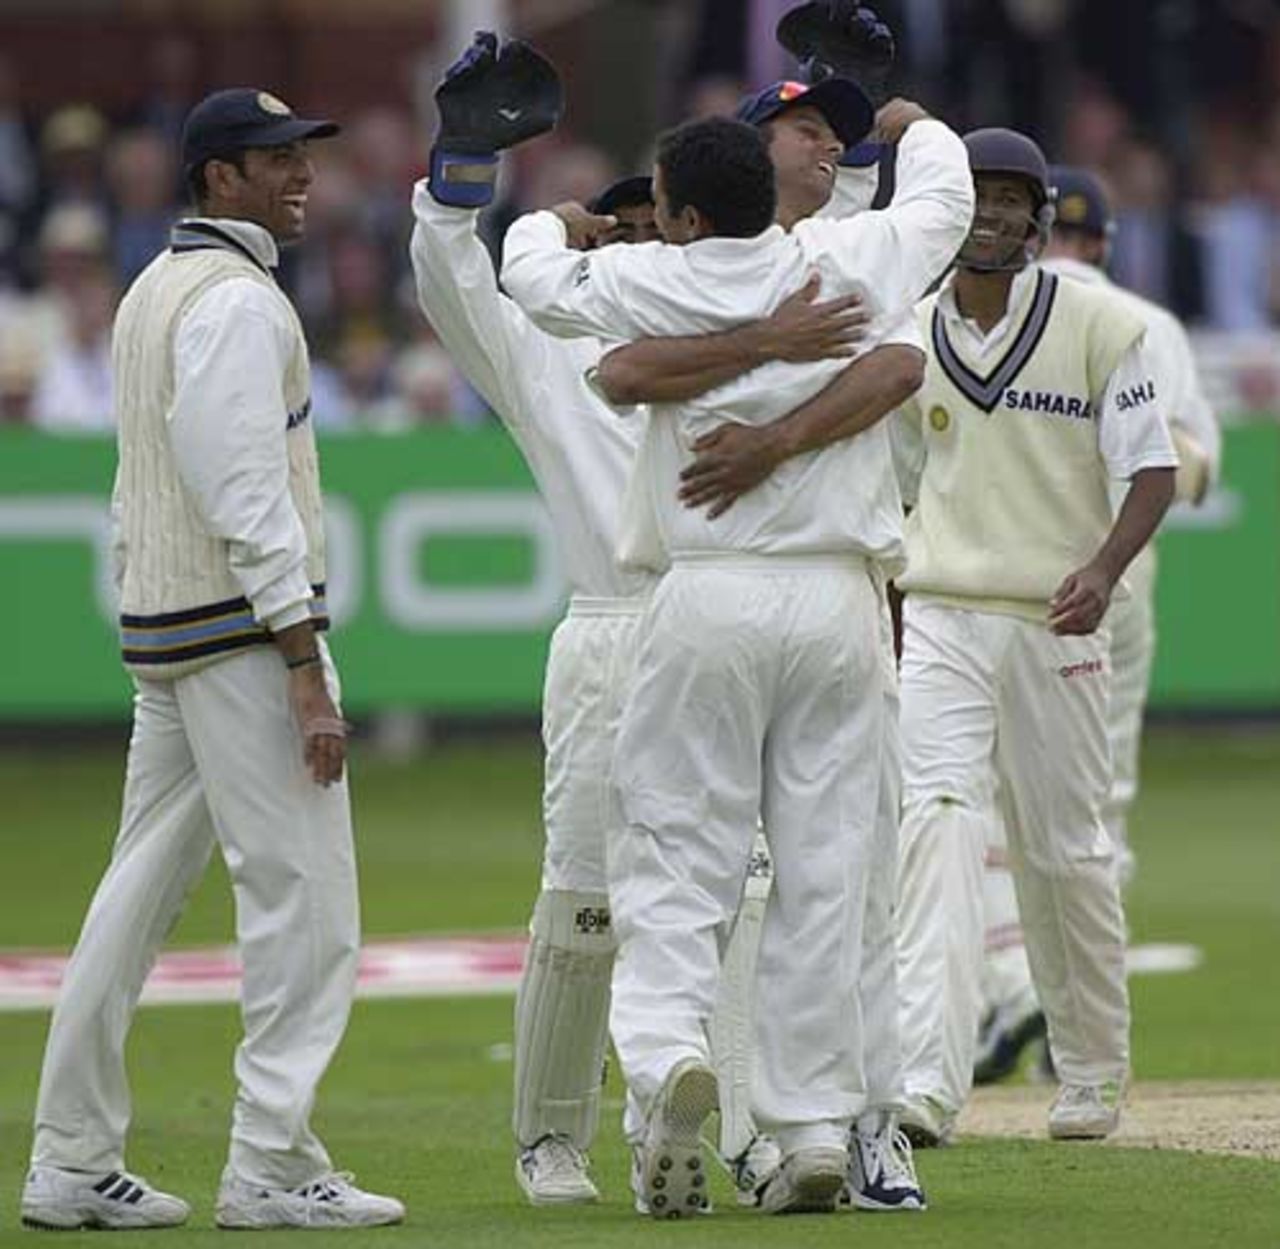 Sehwag, as a  bowler, is embraced after capturing the wicket of Crawley for 64., England v India, 1st npower Test at Lord's